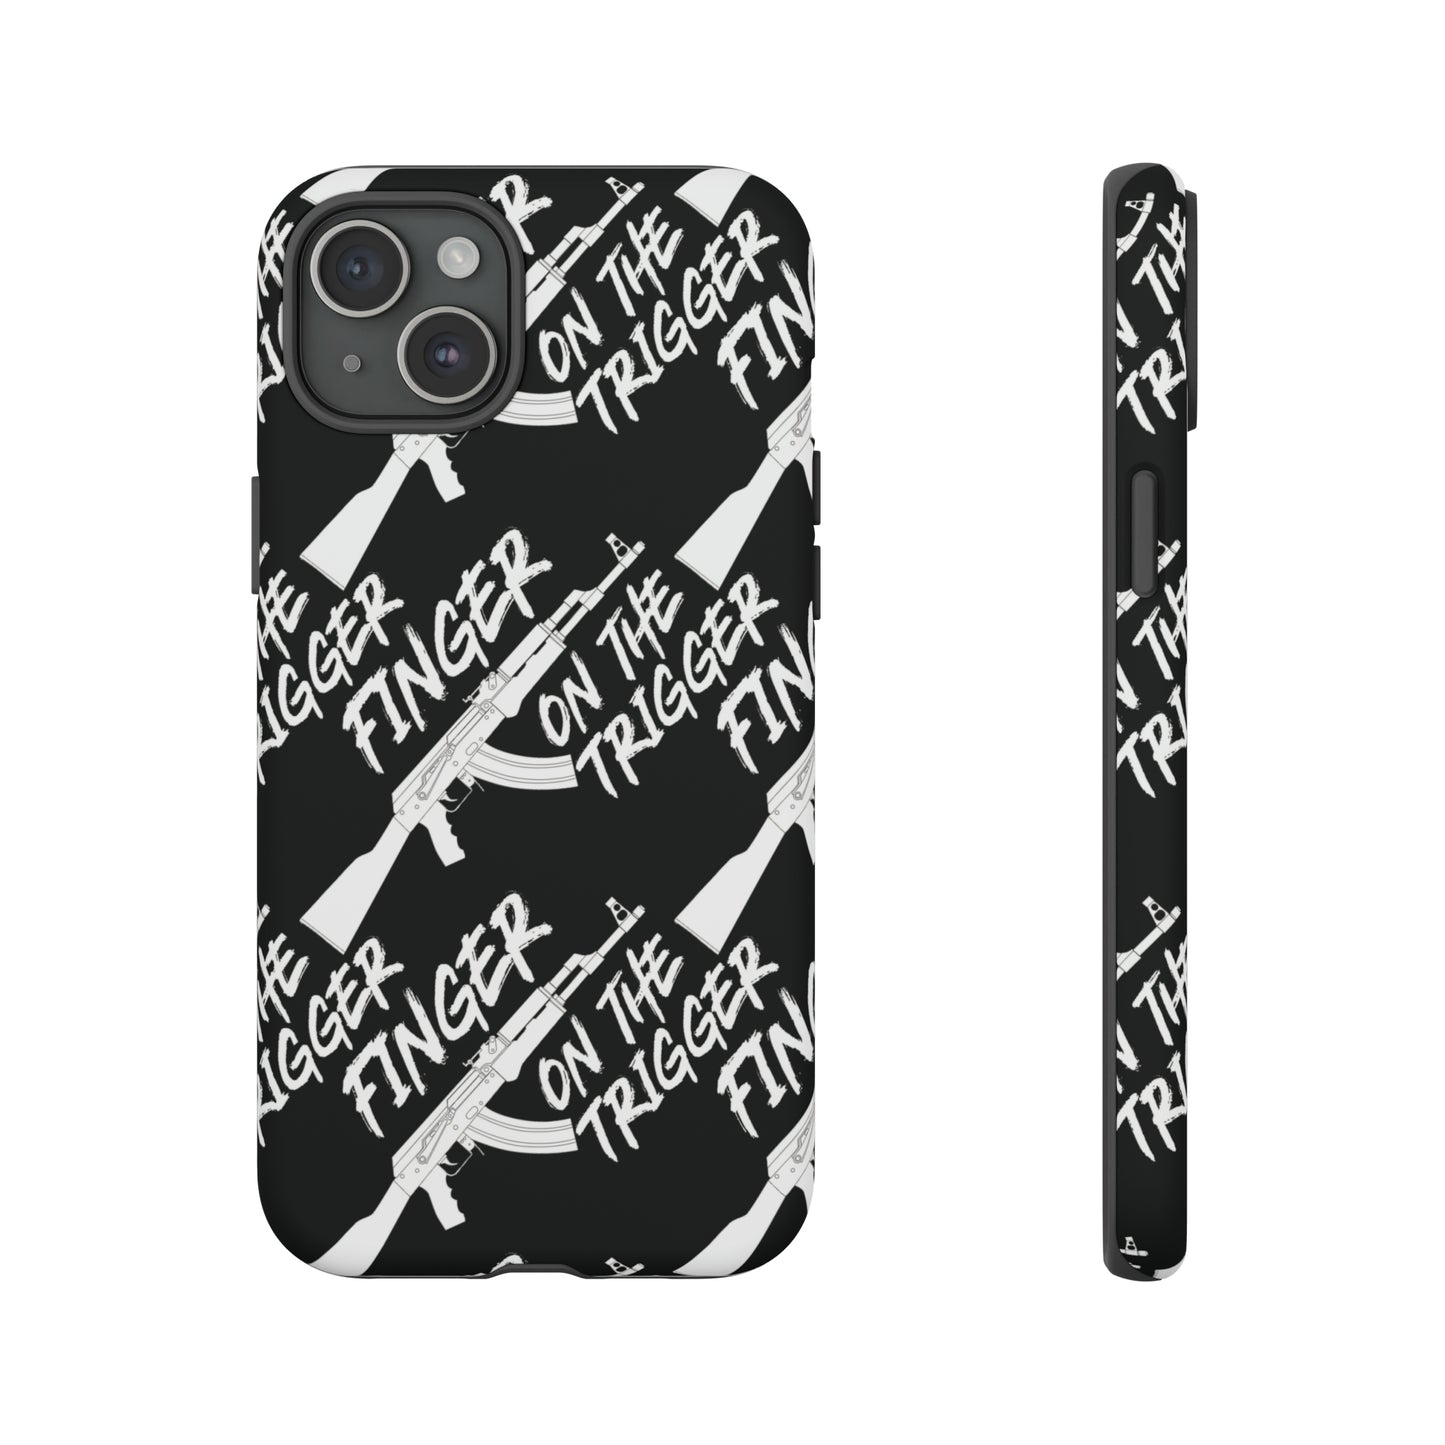 Finger On The Trigger Series: iPhone Case